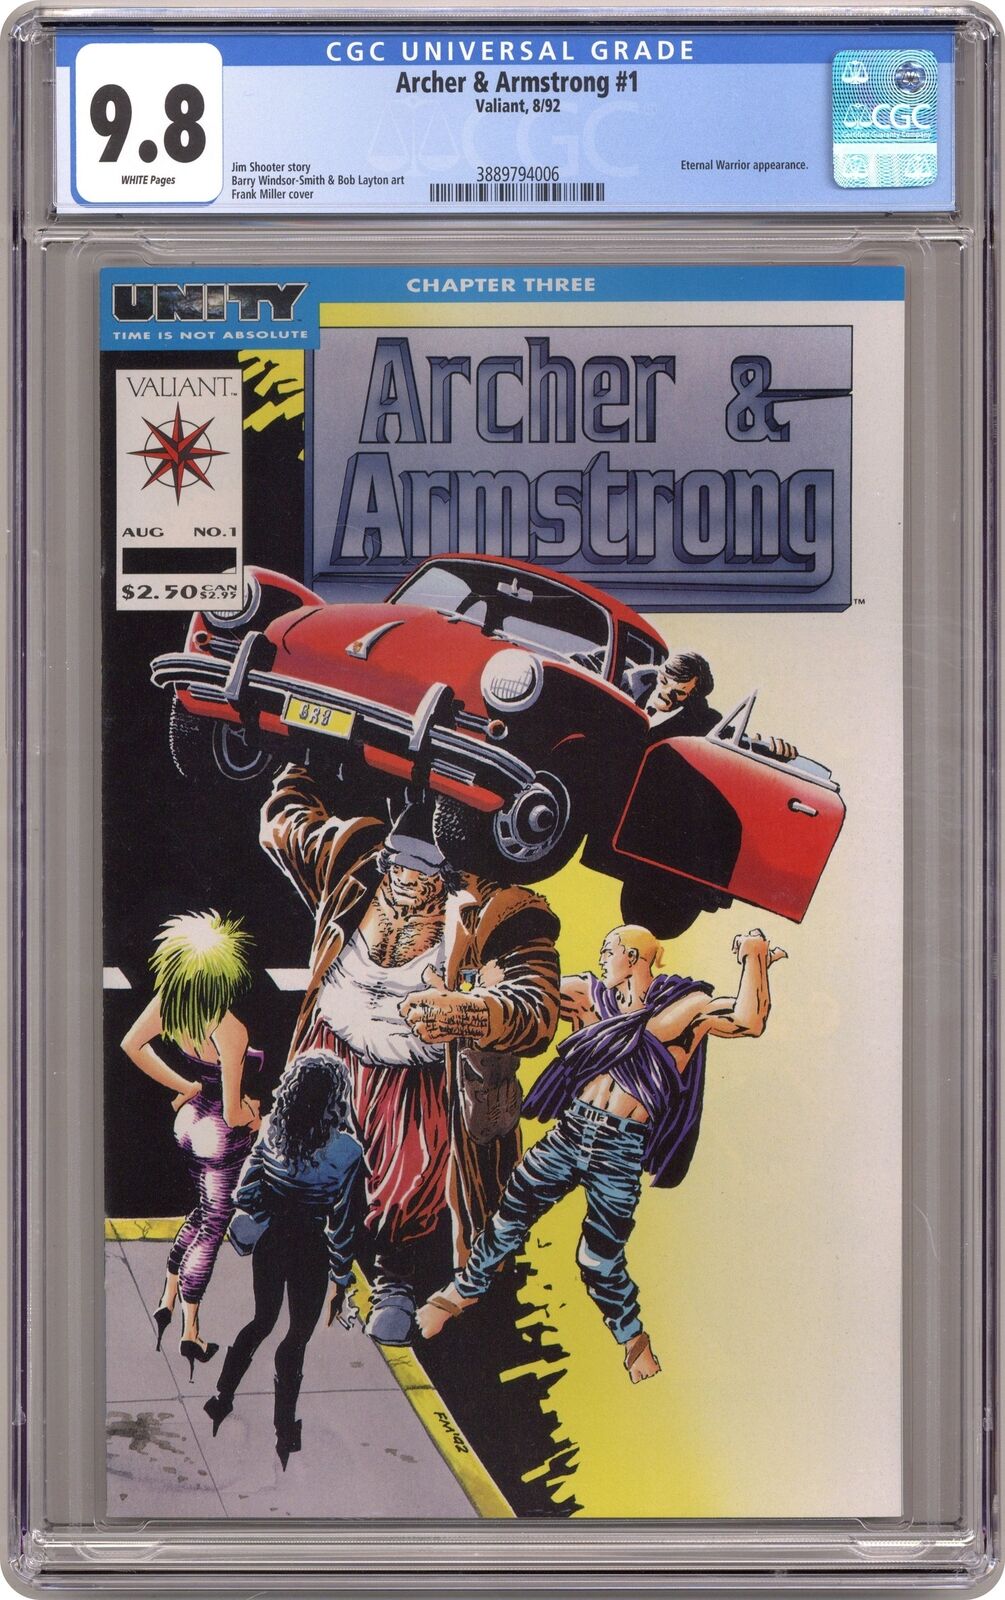 Archer and Armstrong #1 CGC 9.8 1992 3889794006